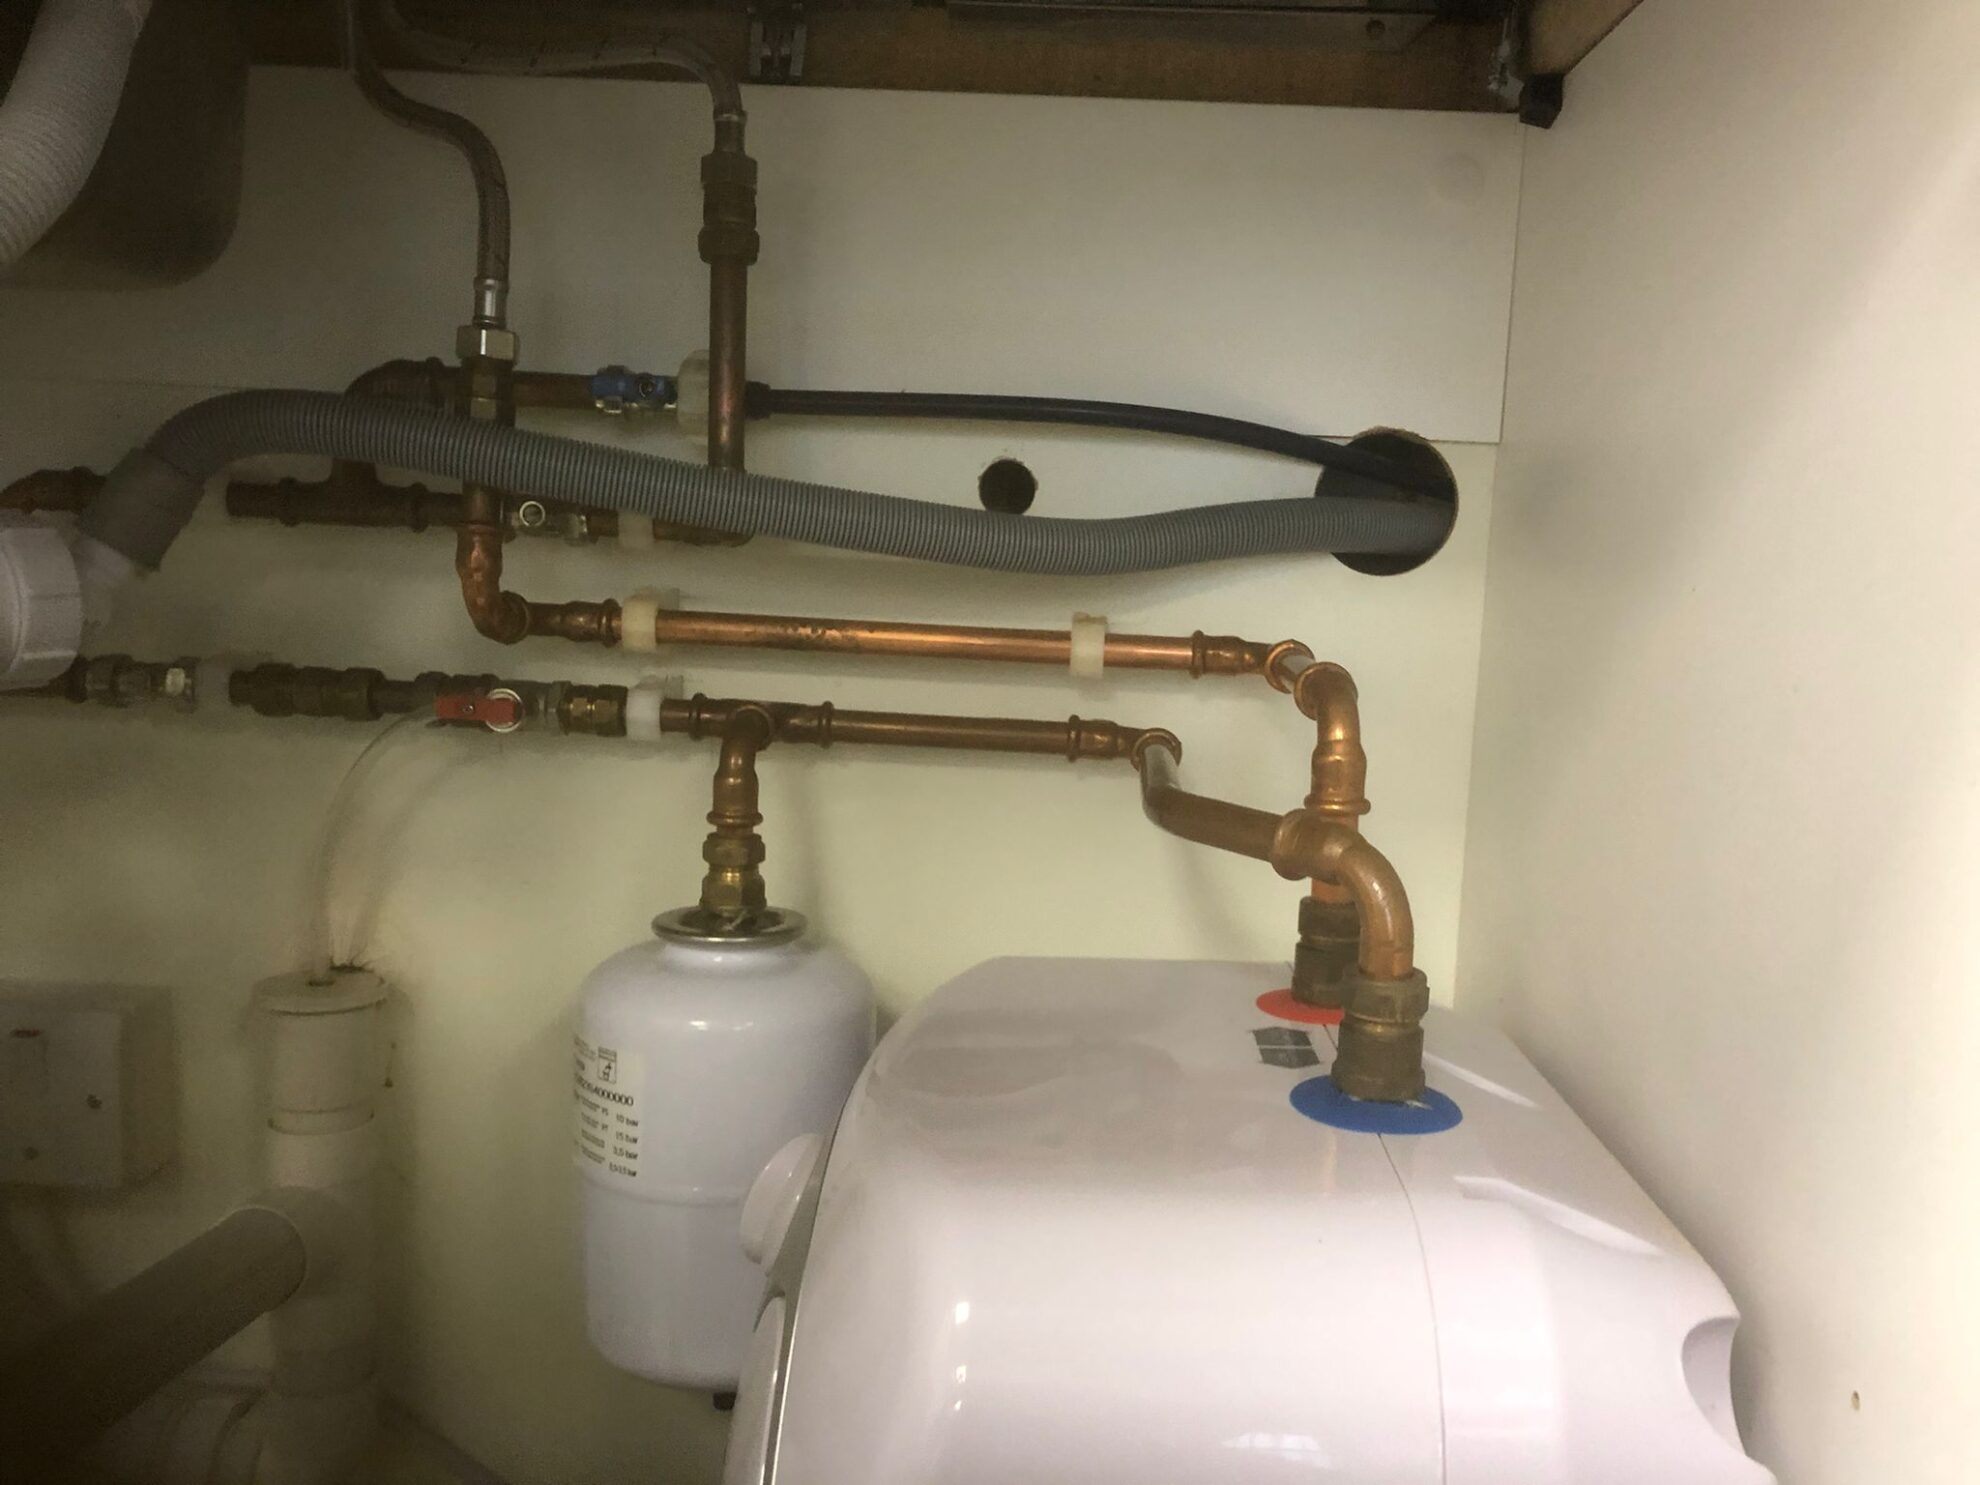 Plumber; Exp: Some experience (0-1 years)